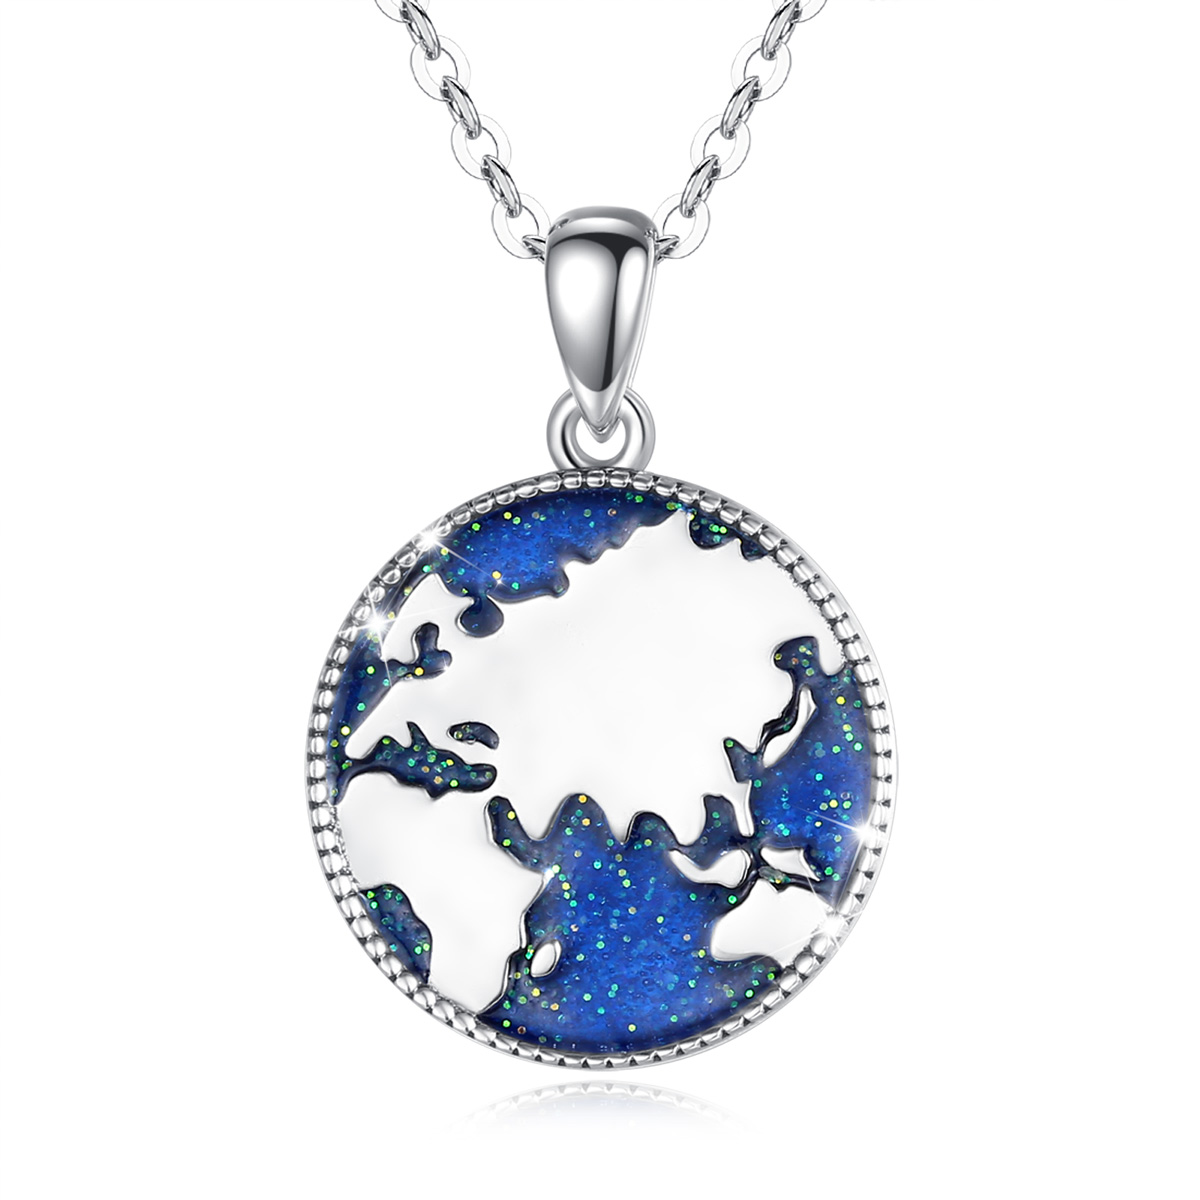 Merryshine Jewelry S925 Sterling Silver Vintage Oxidized World Map Blue Earth Necklace